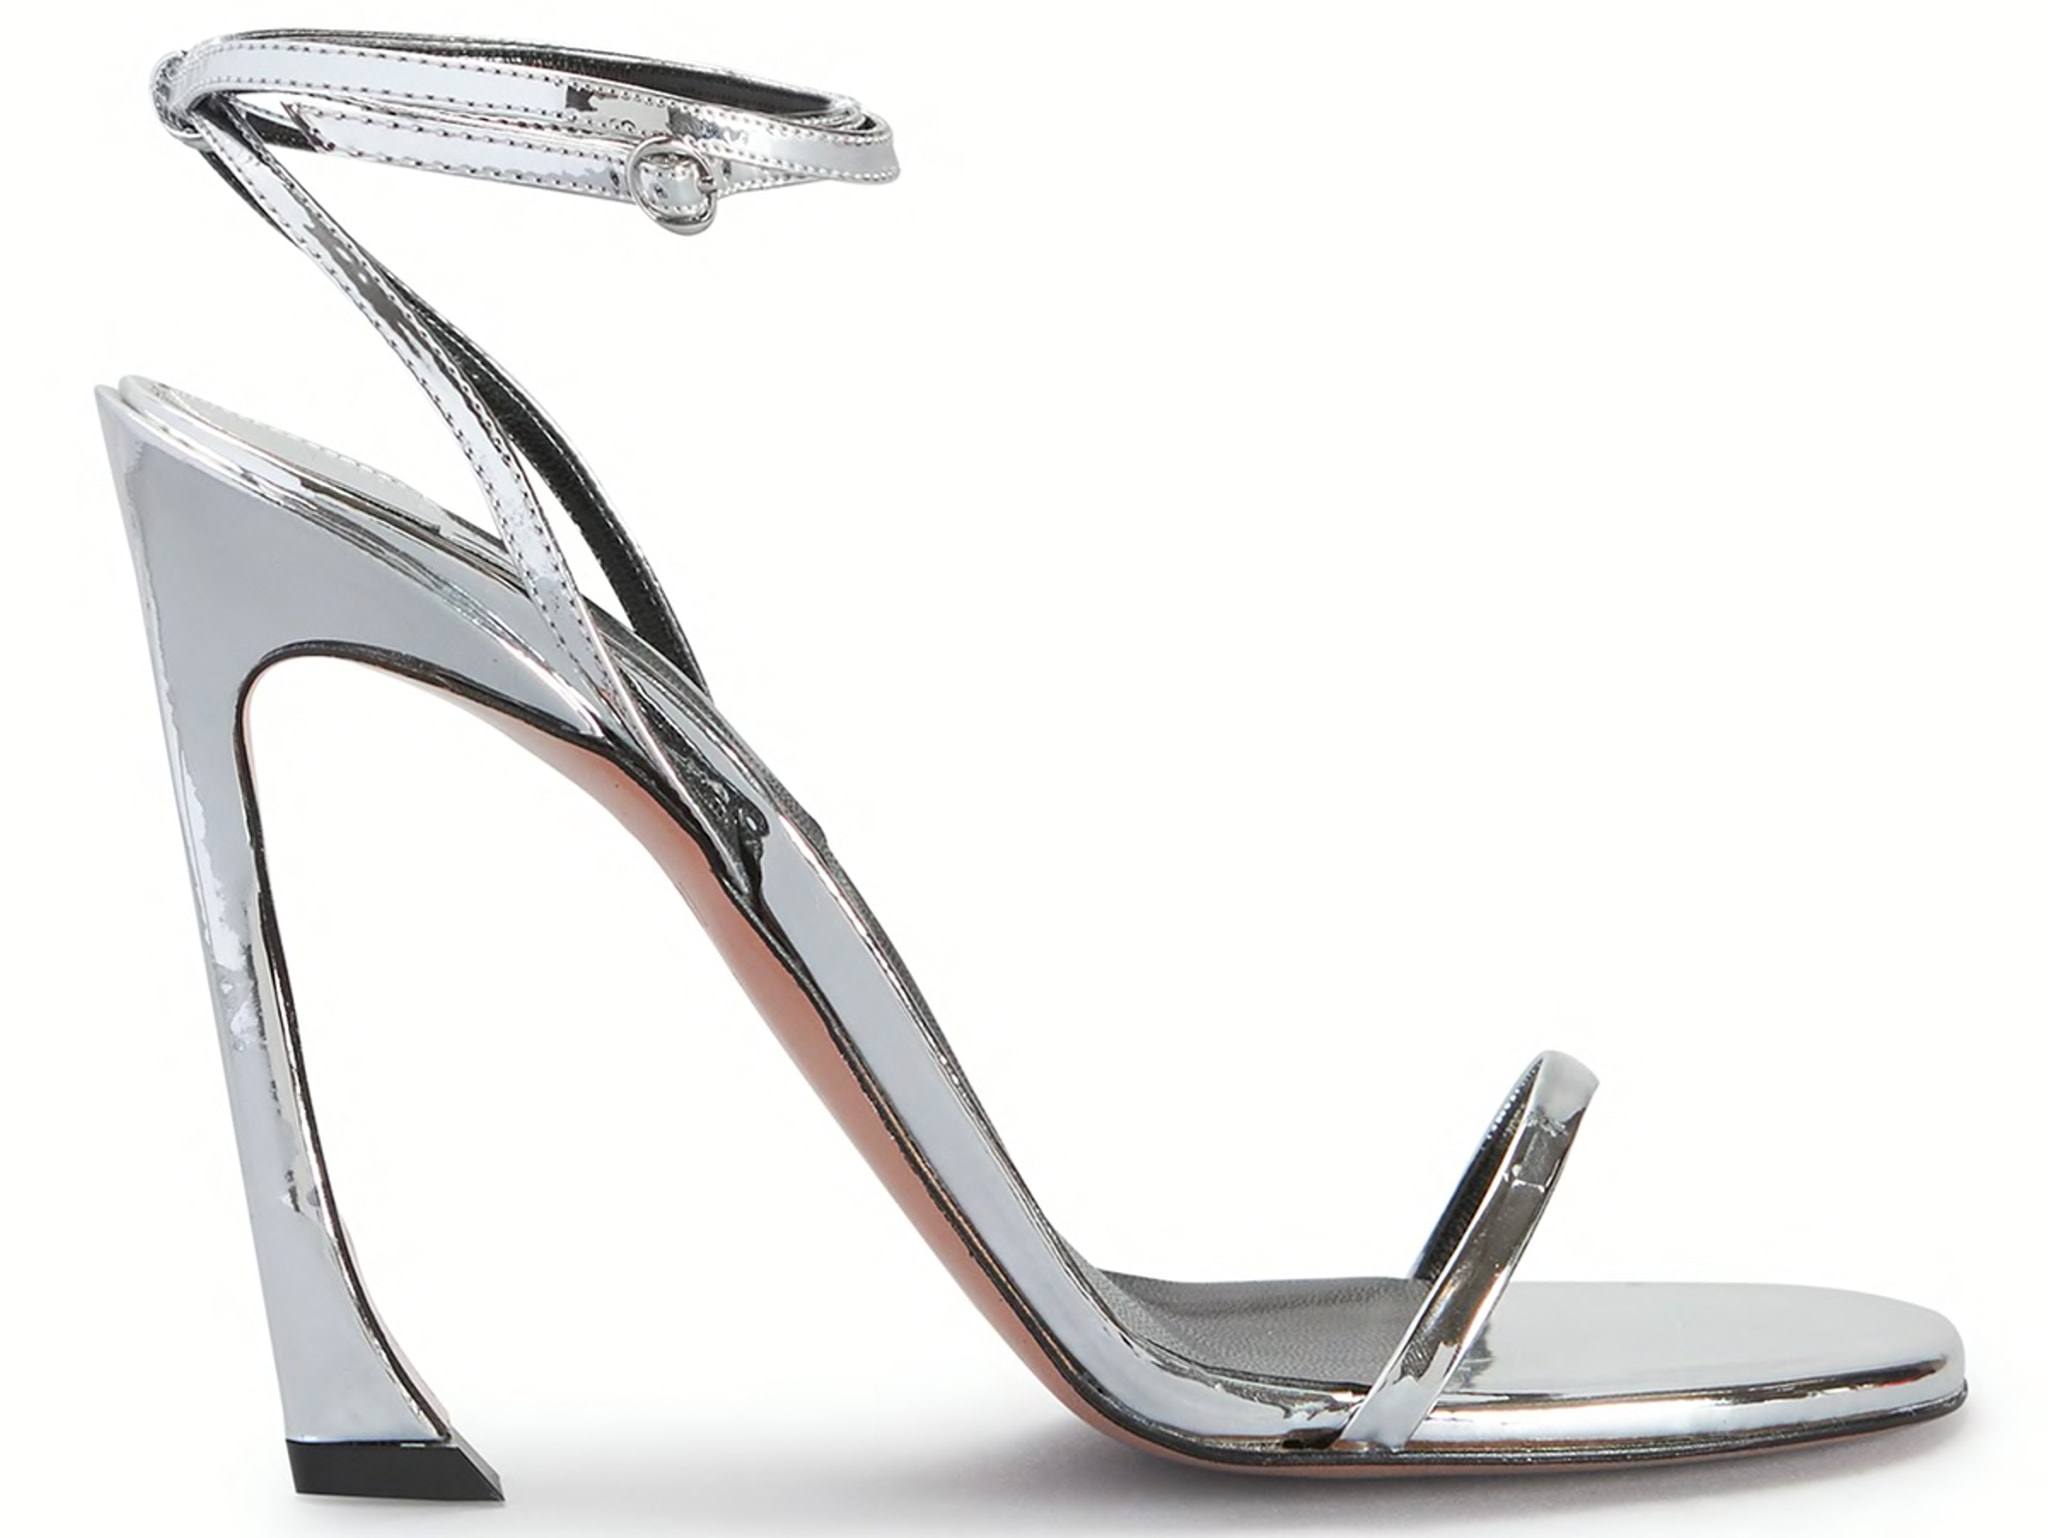 The Piferi Fade sandals have slim straps and the label's signature angled heels